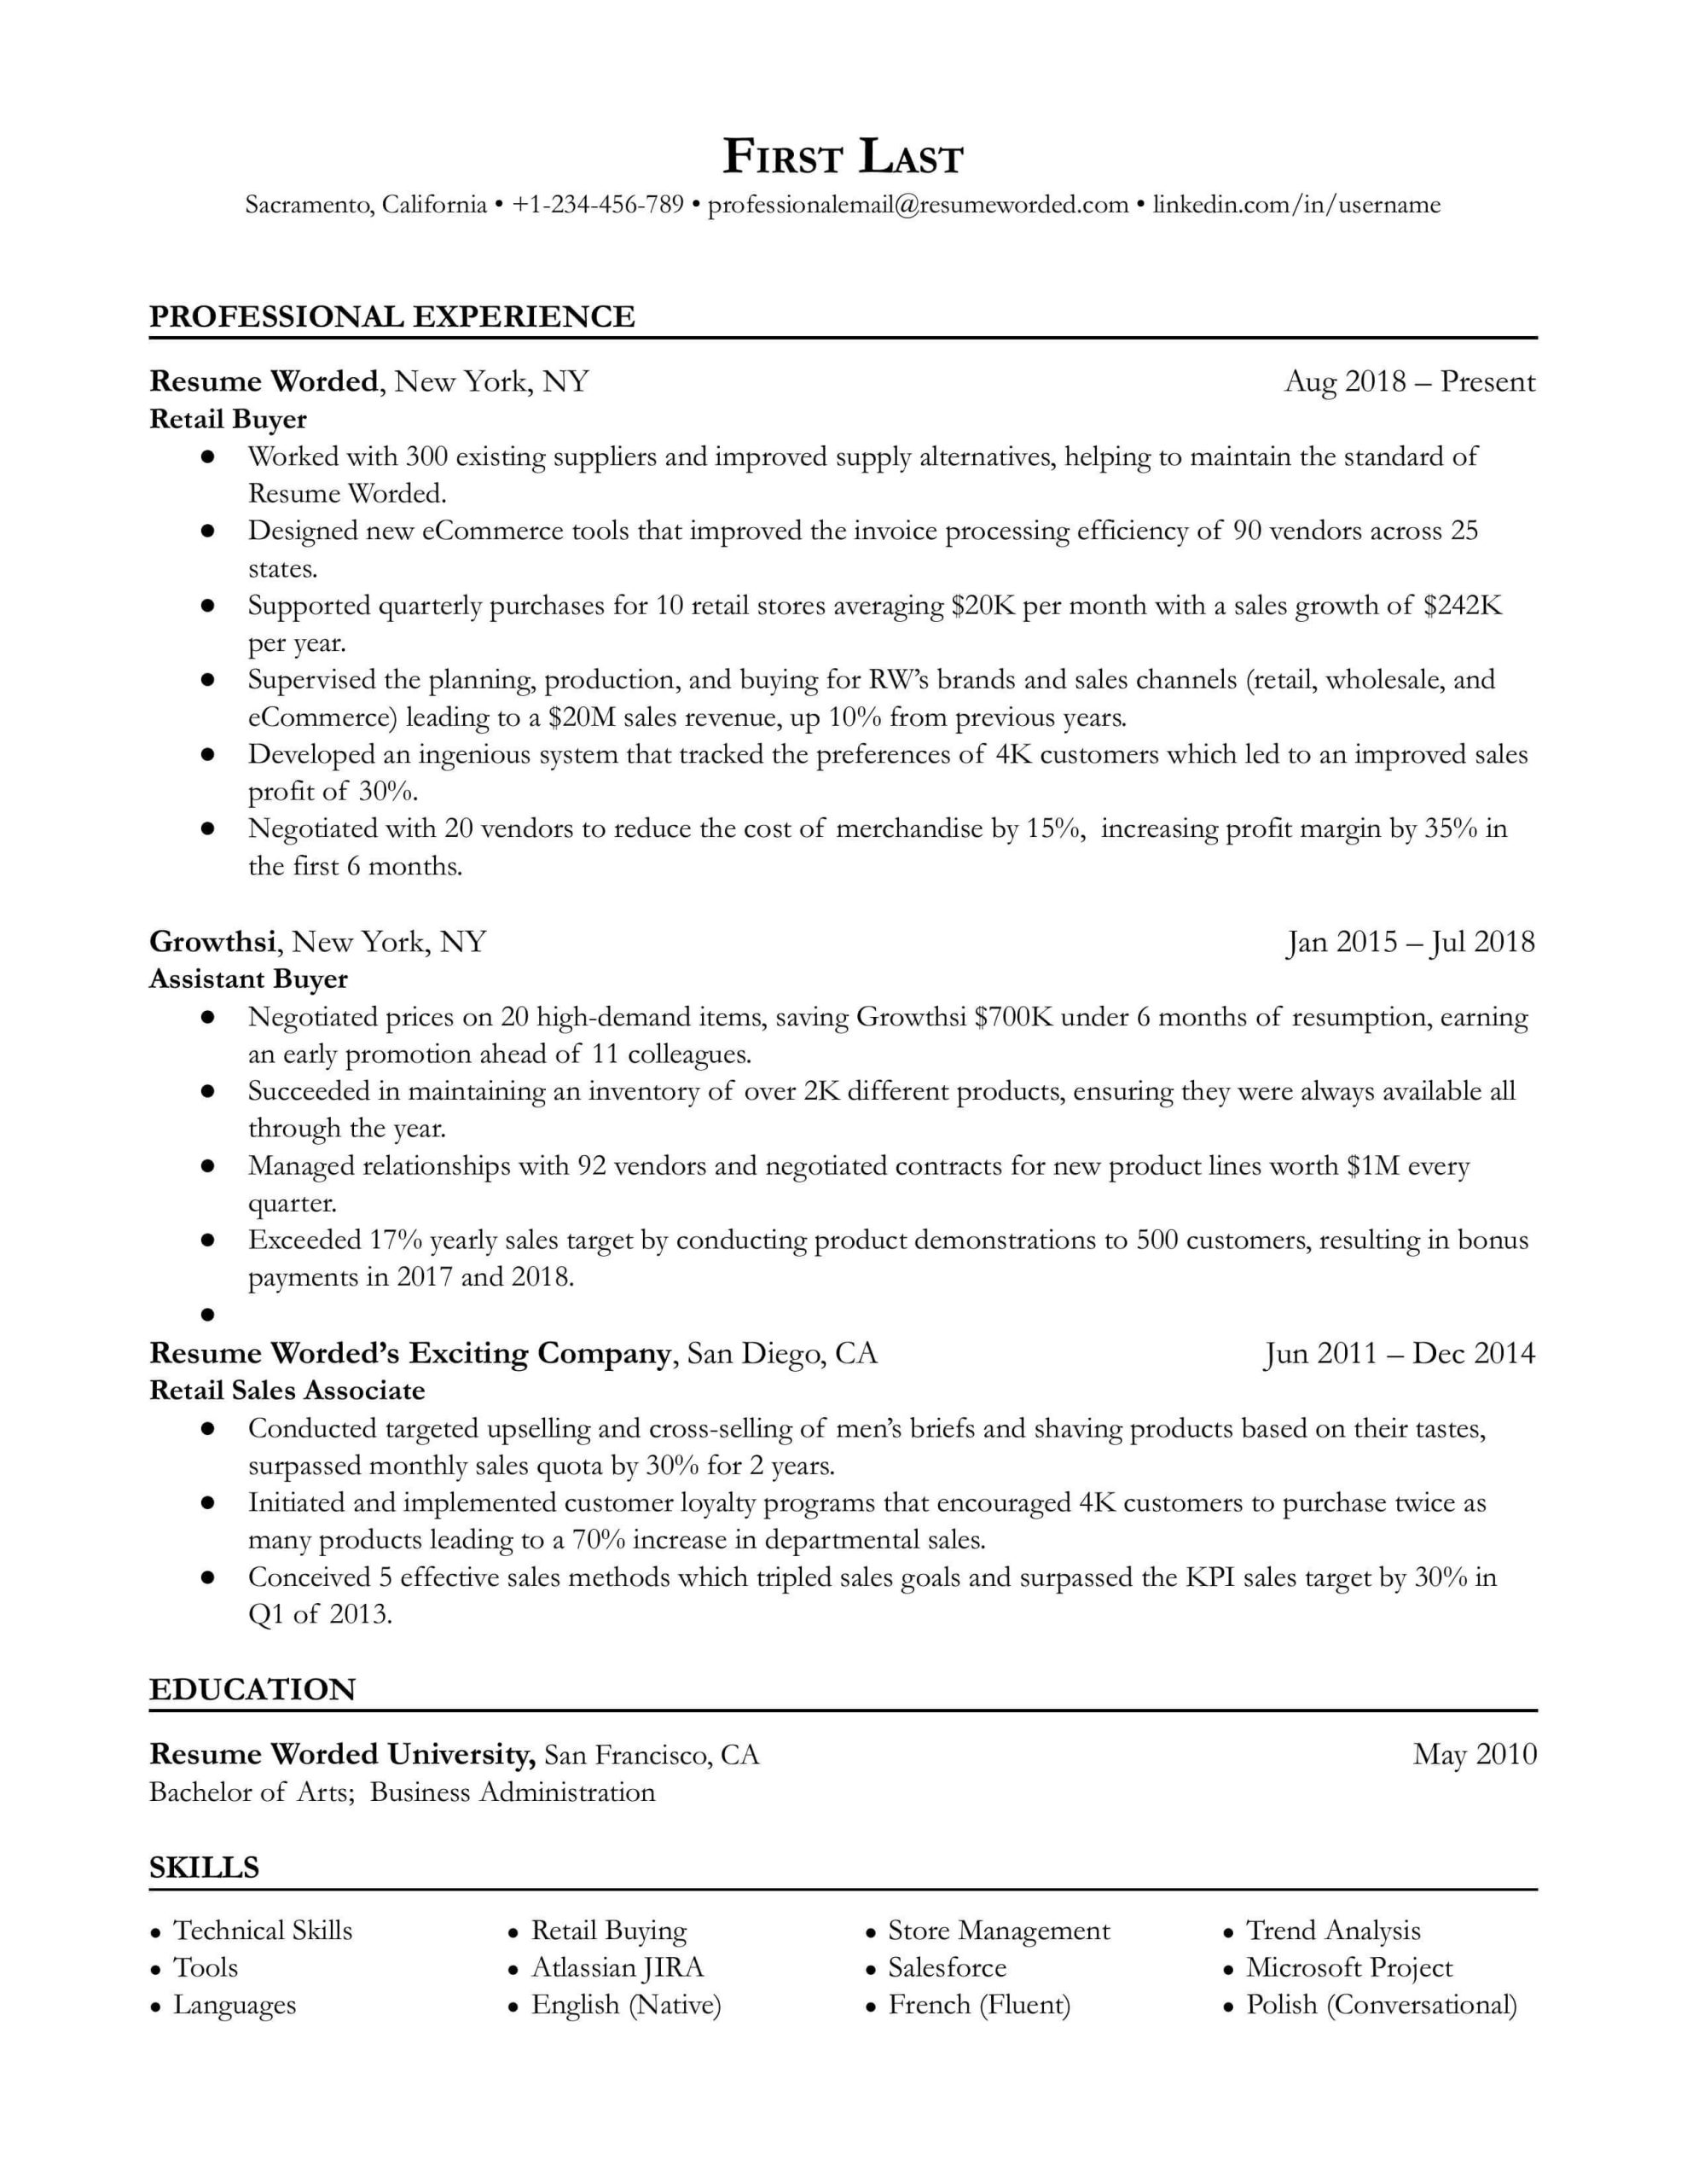 Sample Resume for High End Retail Position 5 Retail Resume Examples for 2022 Resume Worded